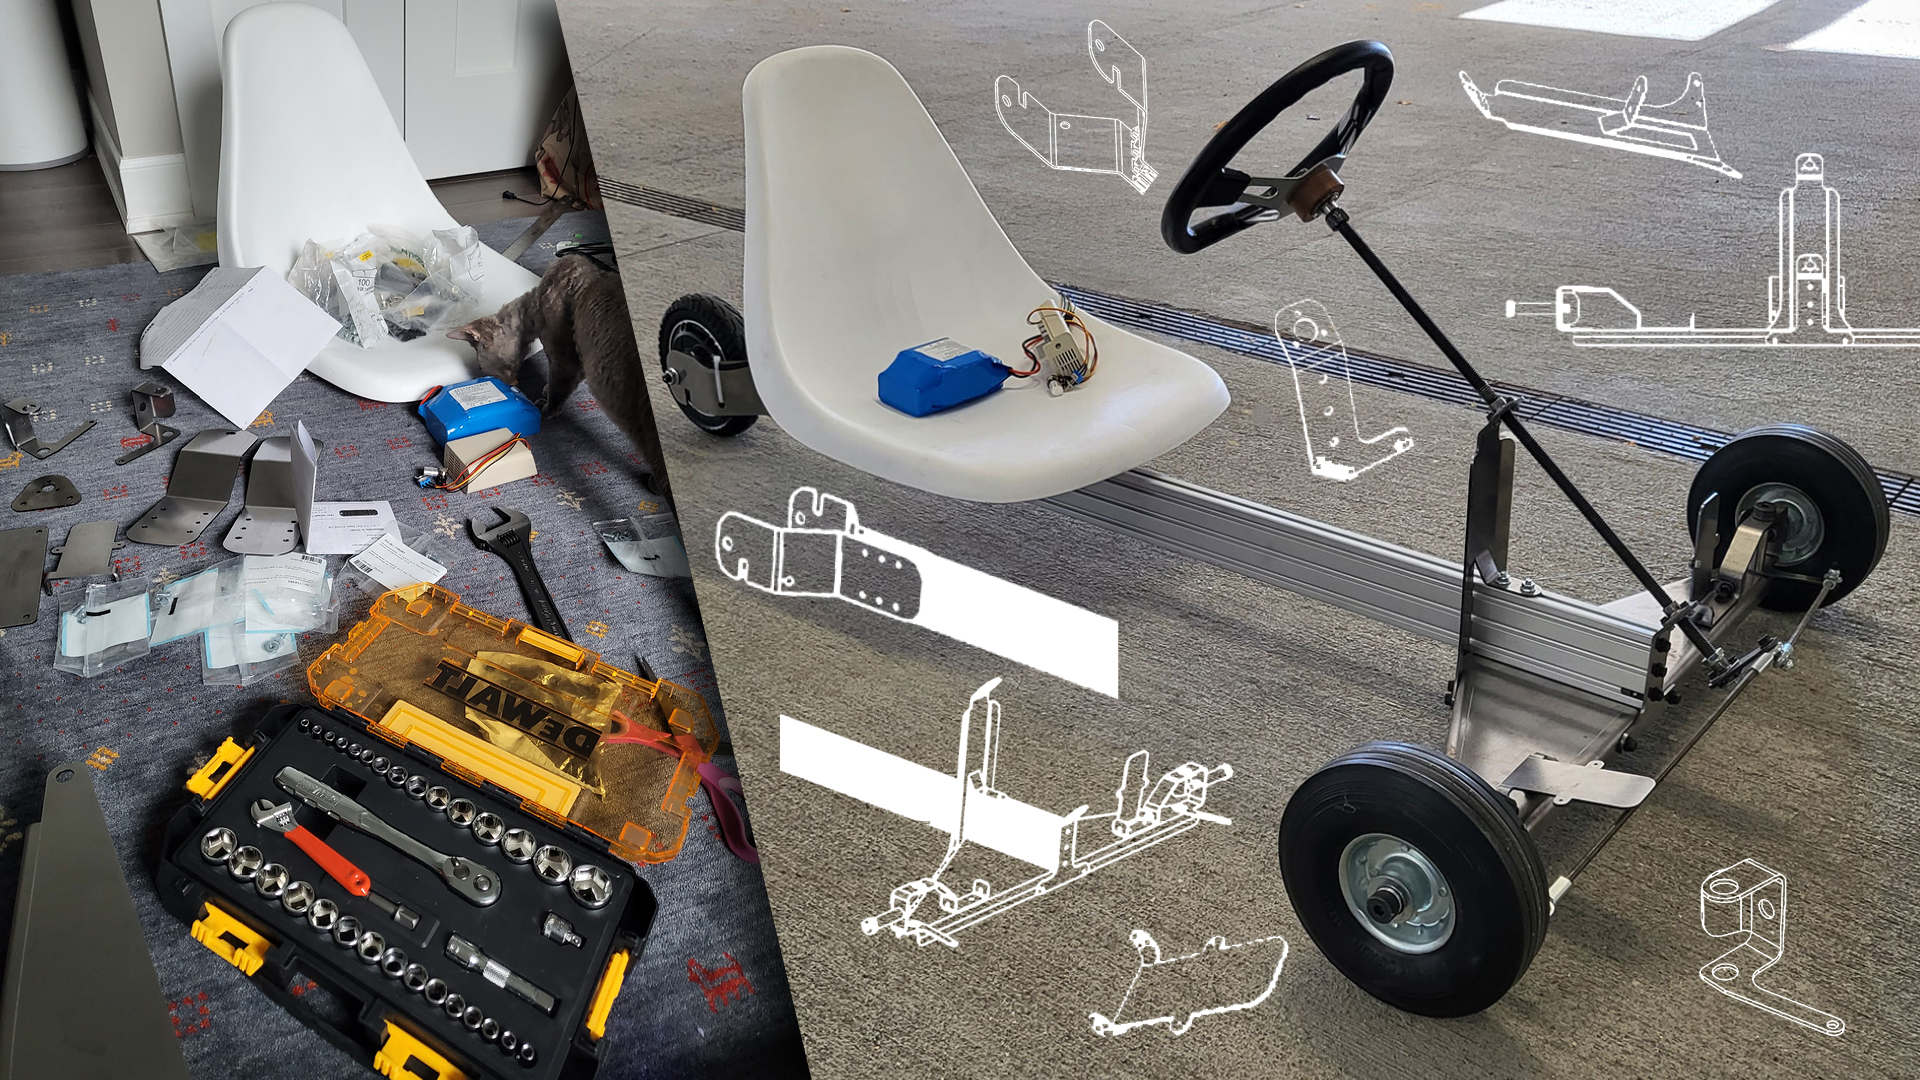 How to Design and Build a Cheap Electric Go-Kart at Home From Scratch